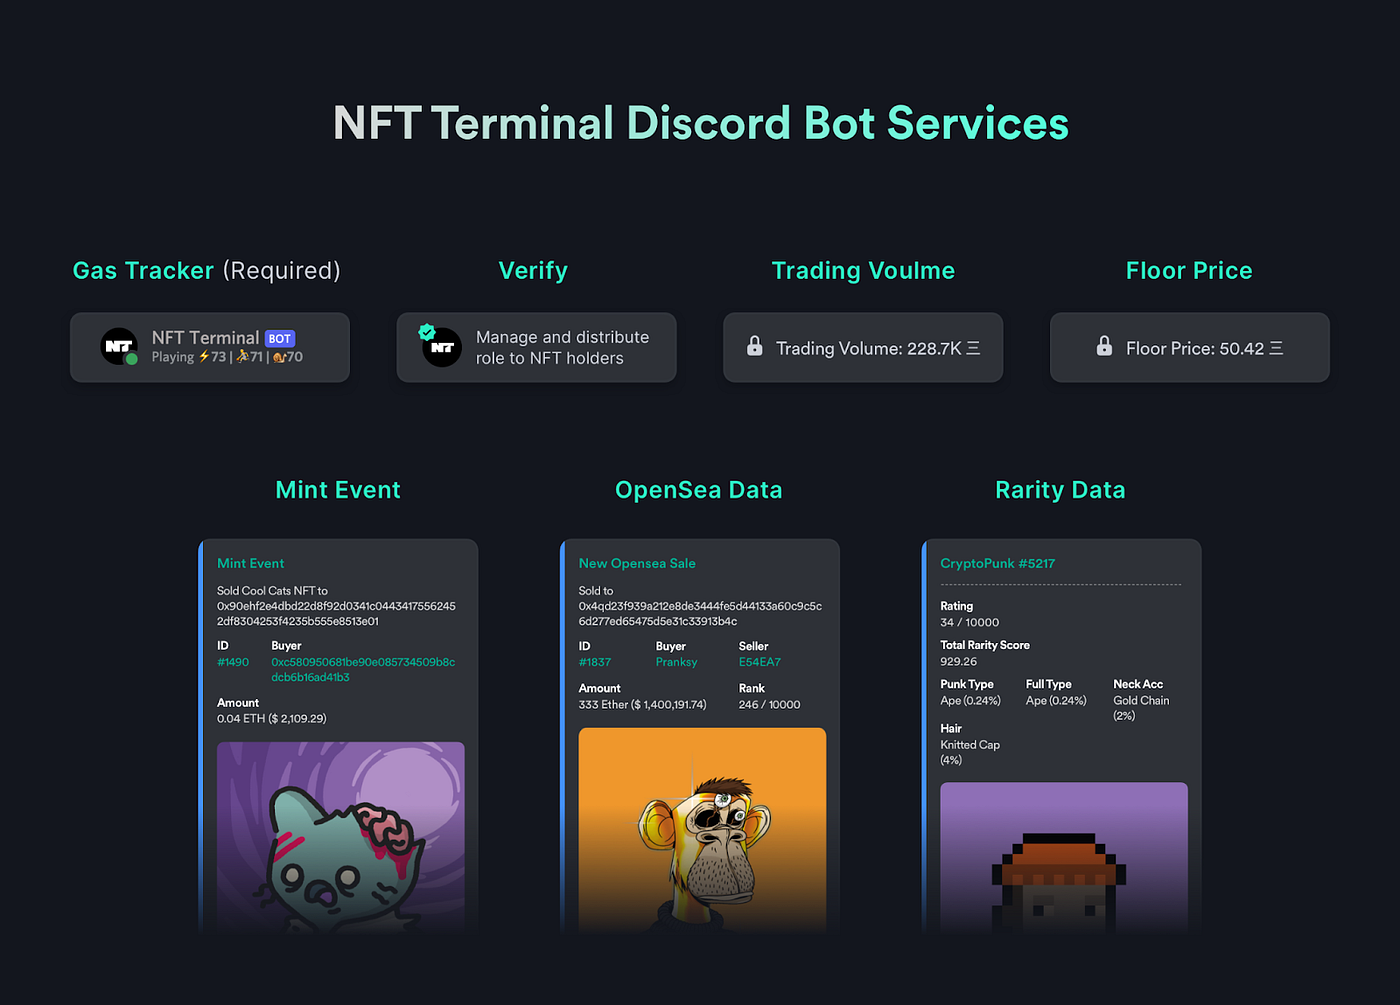 thirdweb: Create a Discord Bot That Gives Roles to NFT Holders